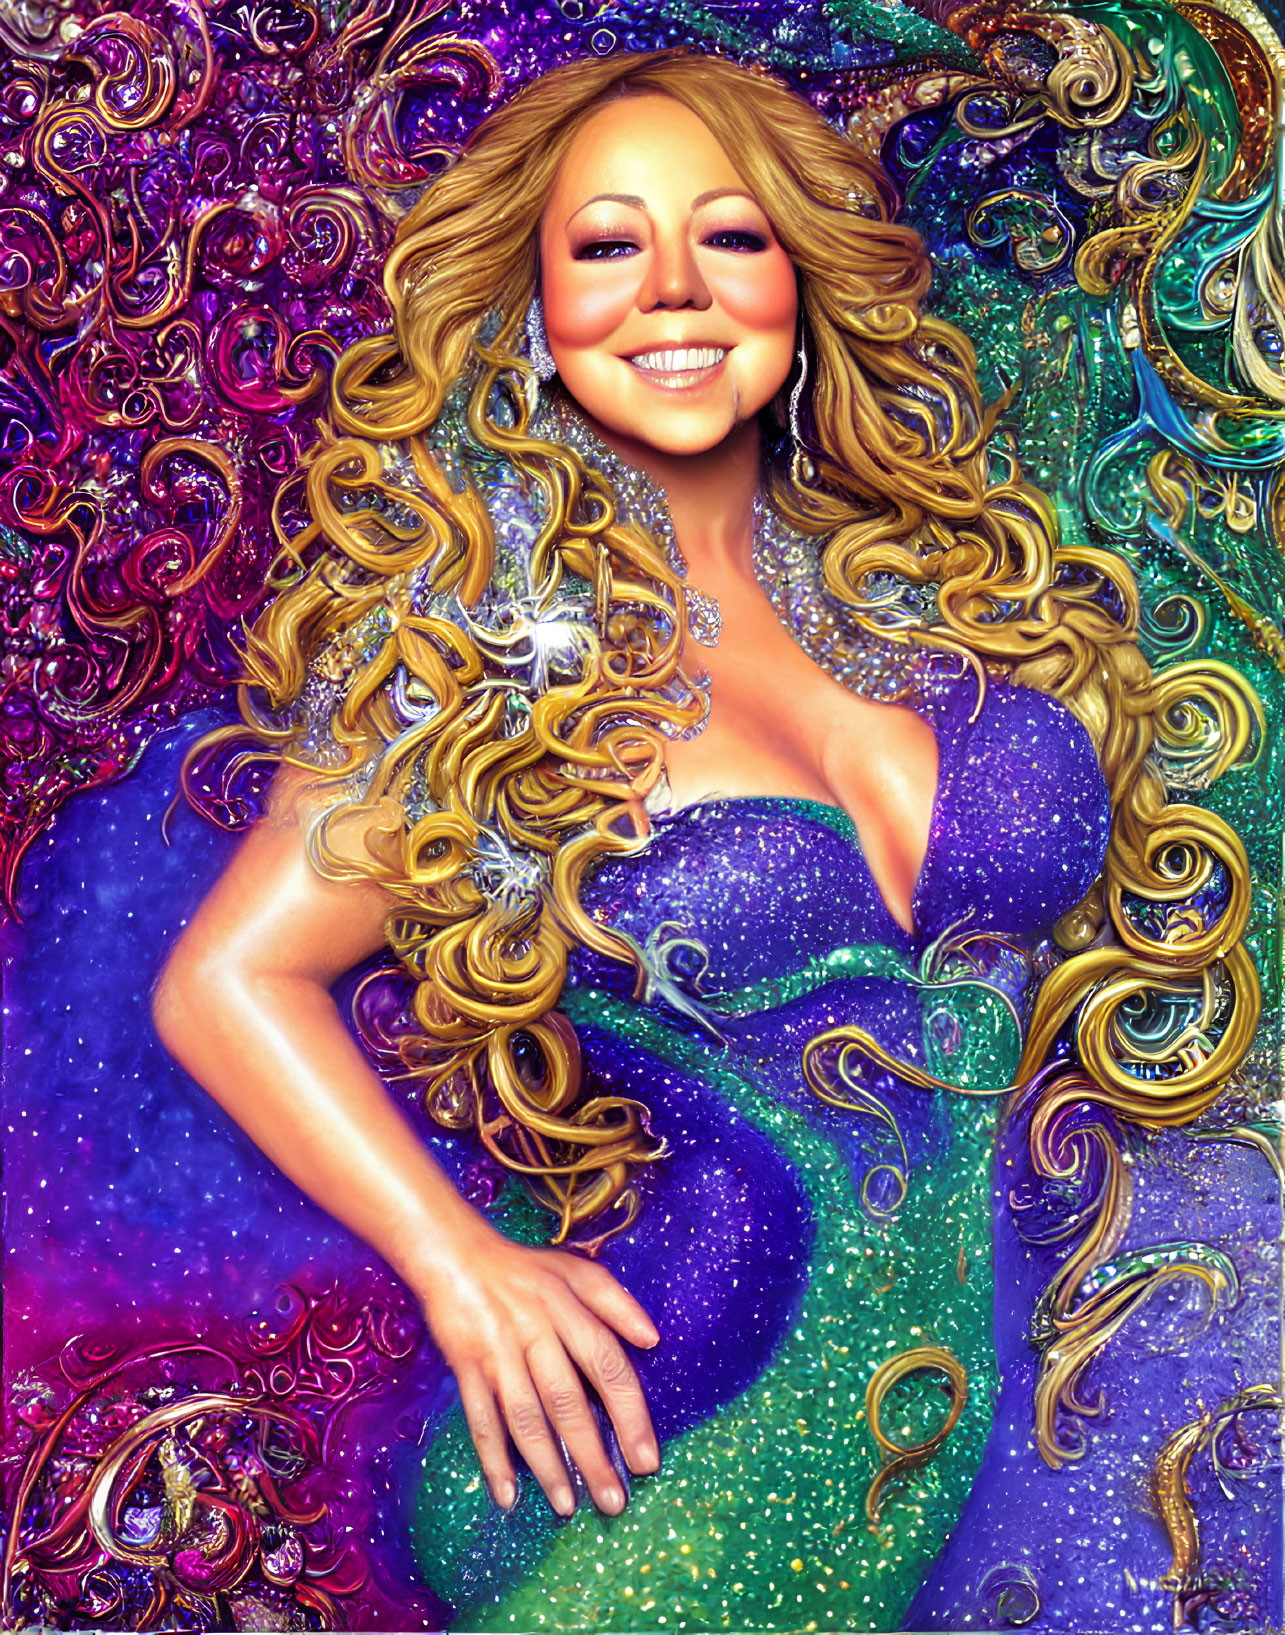 Colorful Portrait of Smiling Woman in Glittery Blue Dress